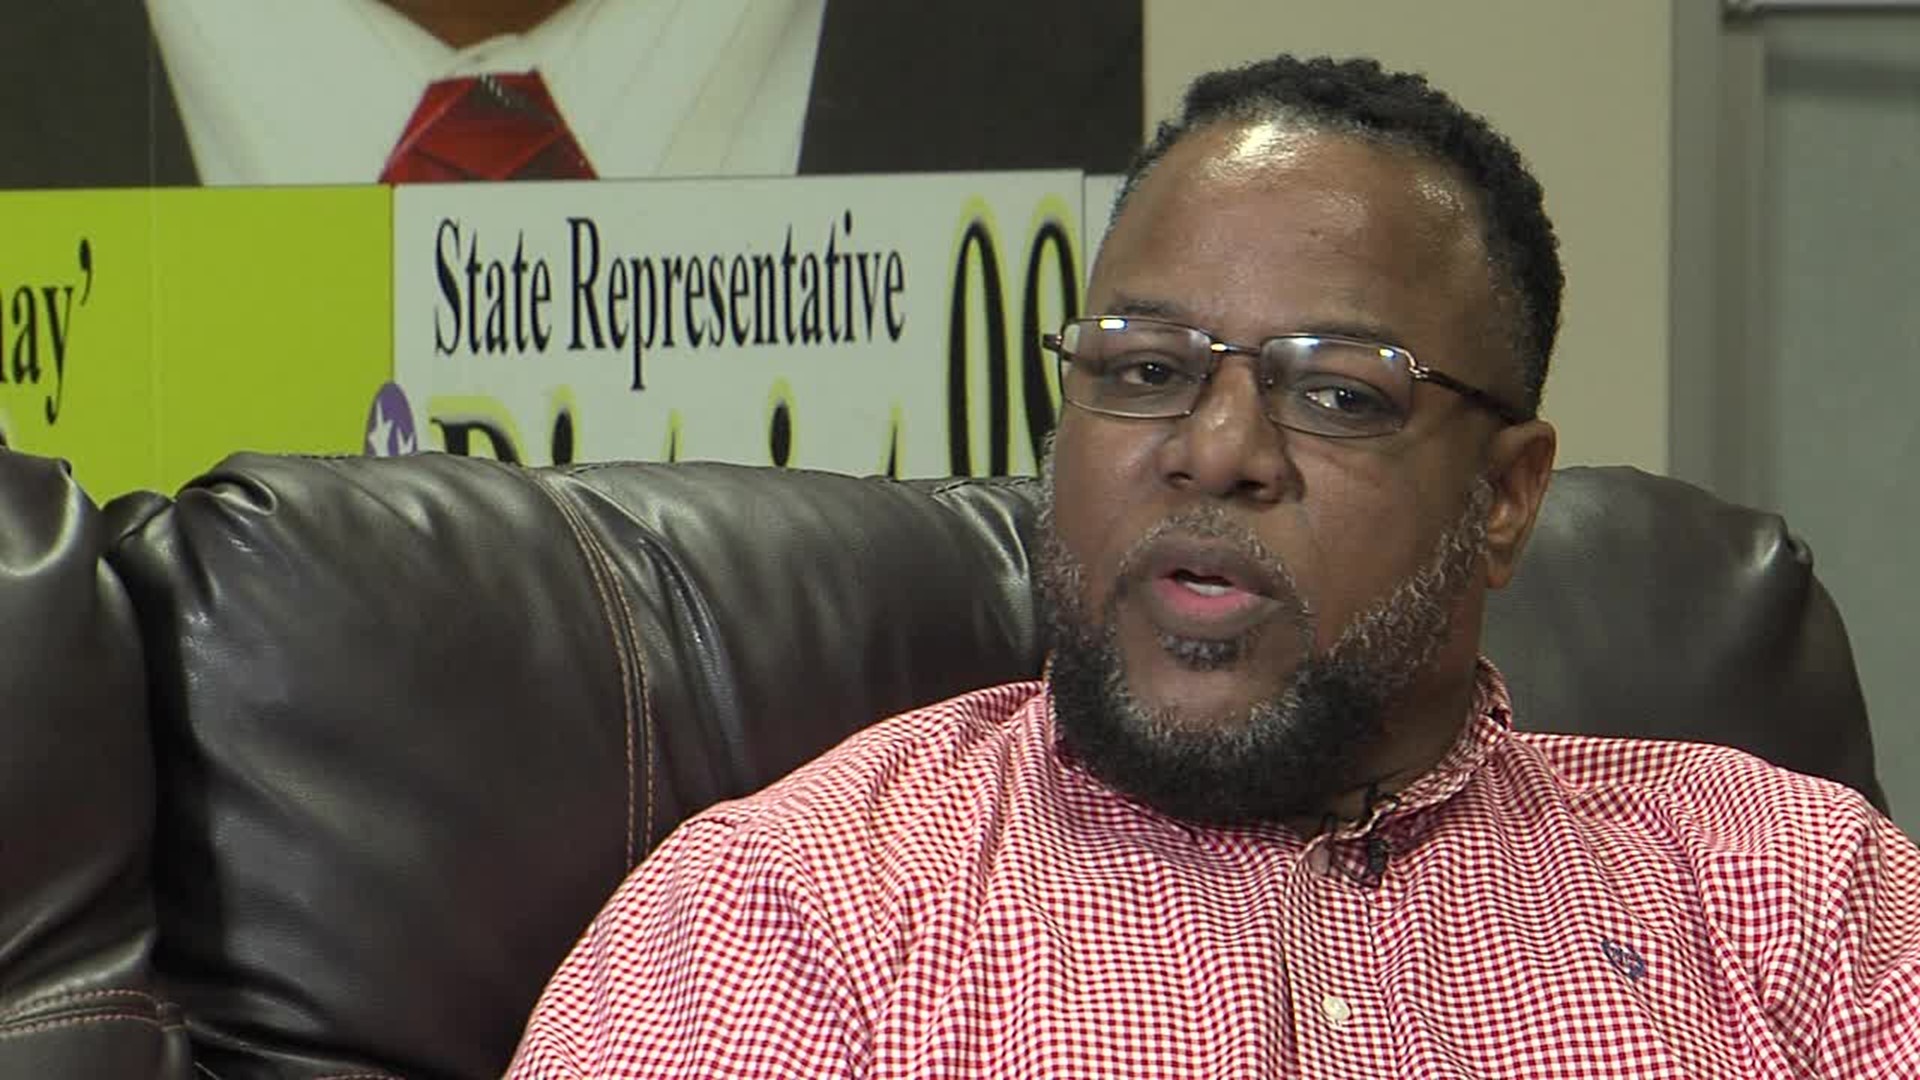 WEB EXTRA: Full interview with TN State Rep. Antonio Parkinson on U.S. Marshal-involved shooting